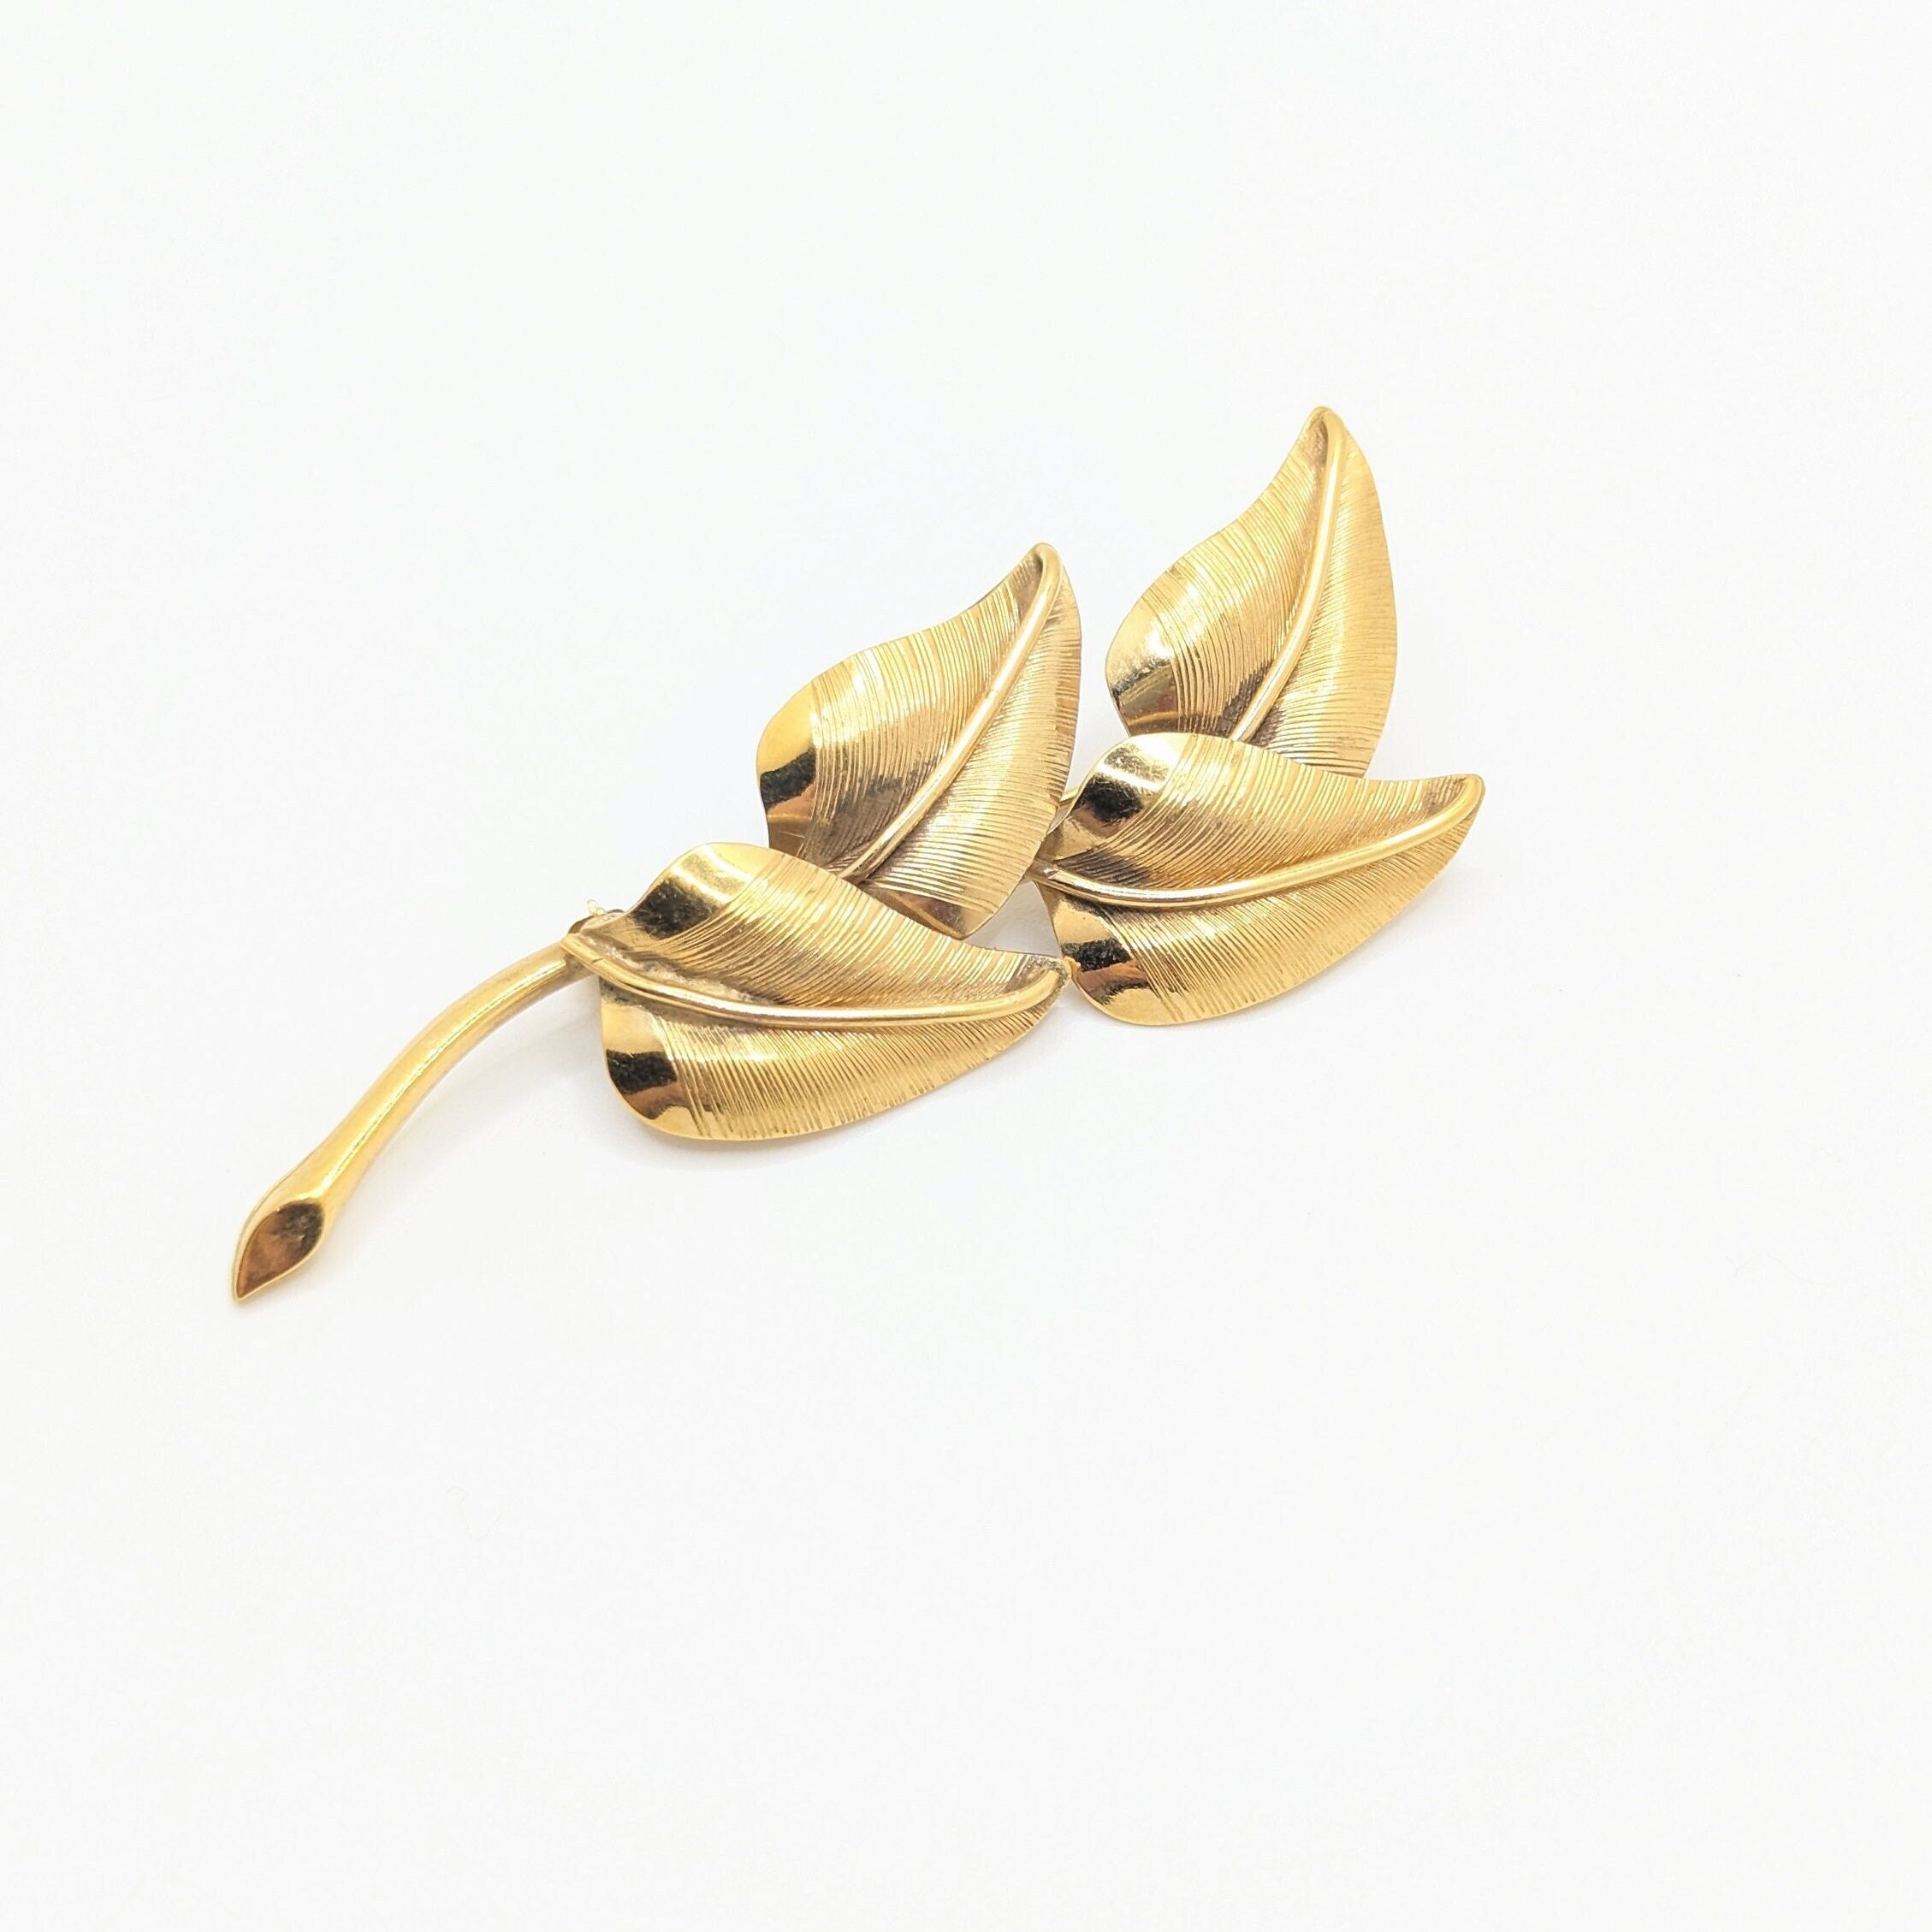 1 PC Bag of 10x32mm 14K Gold Filled Brooch Pin